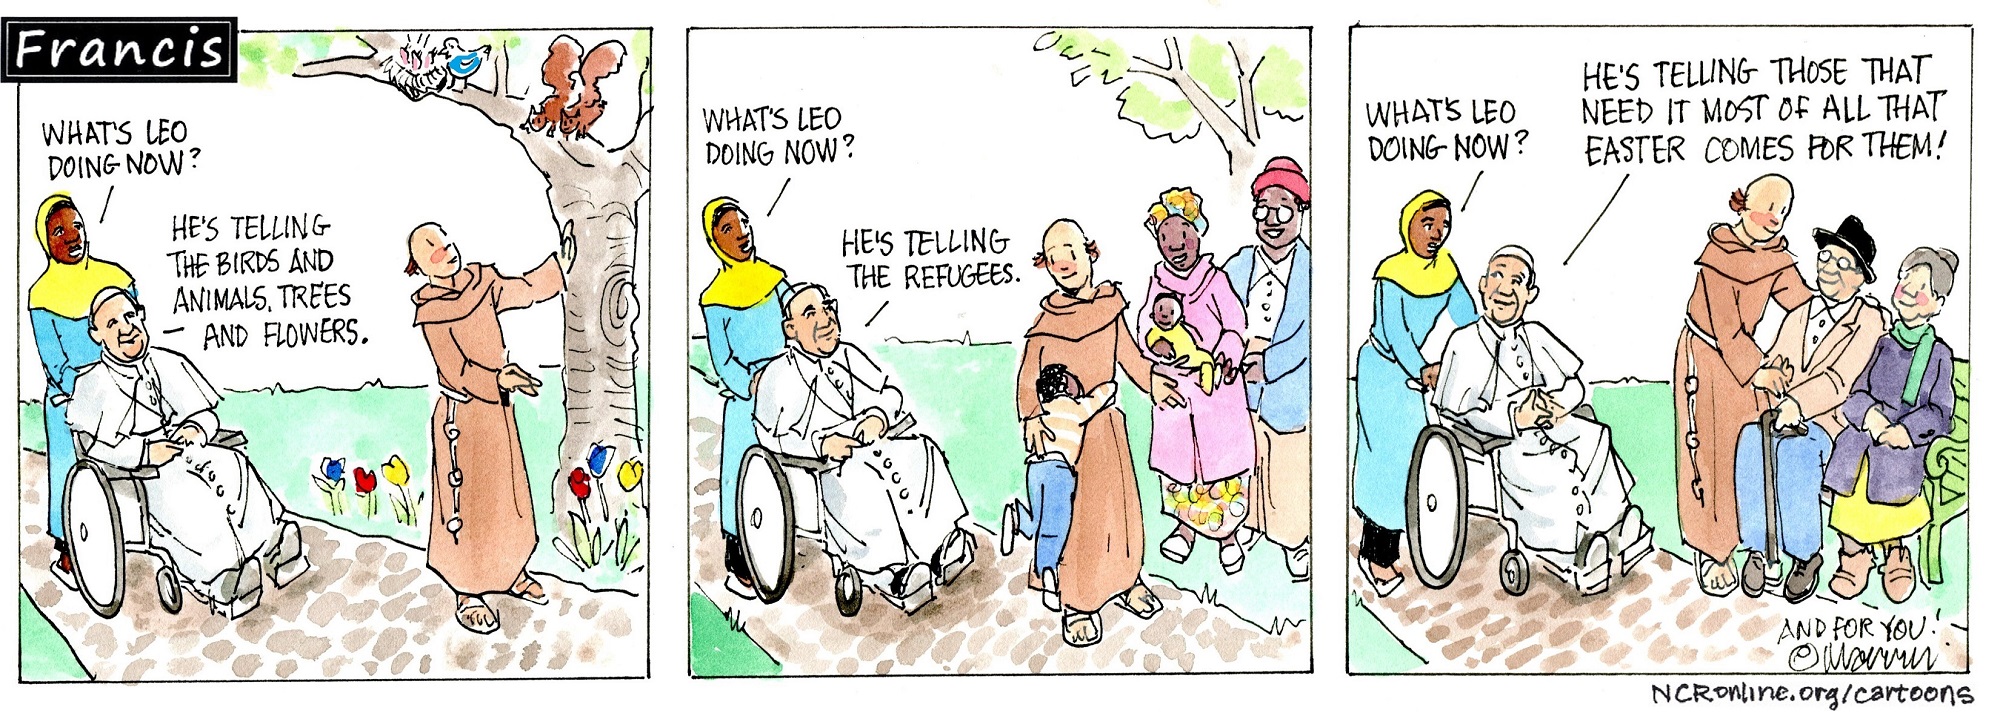 Francis, the comic strip: What's Leo doing now? (Hint: It involves Easter!)